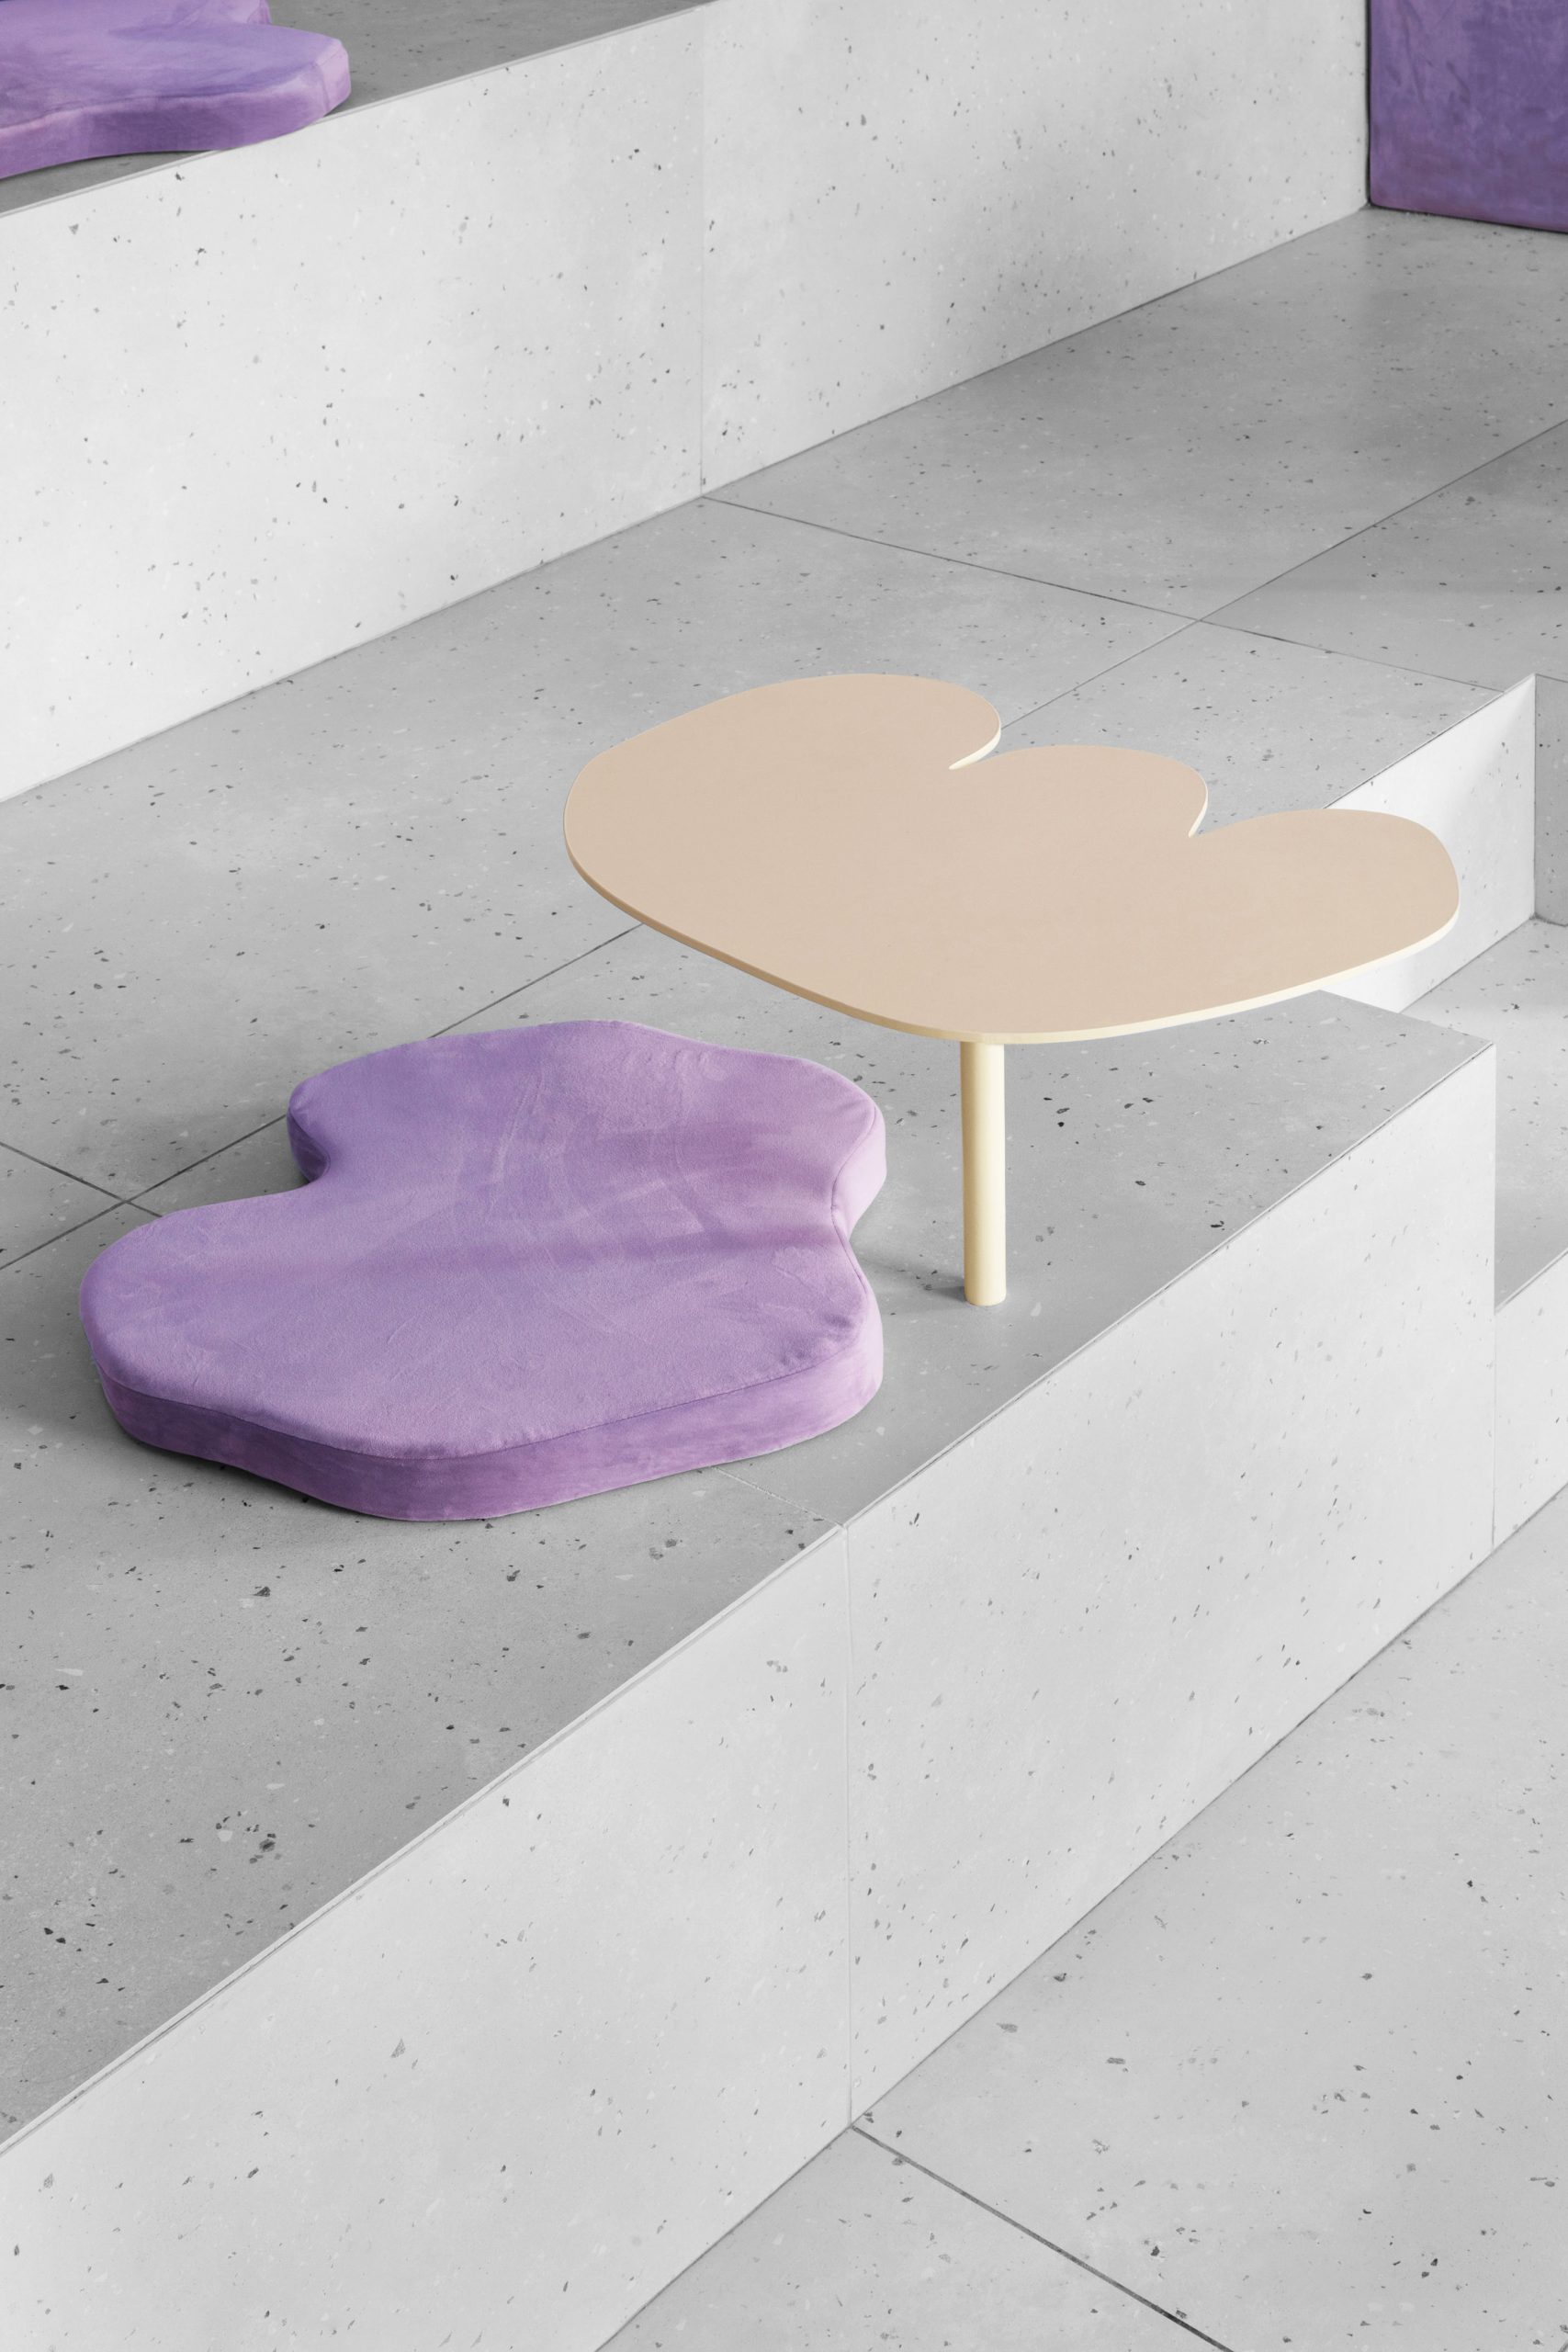 Table and cushion against concrete seat